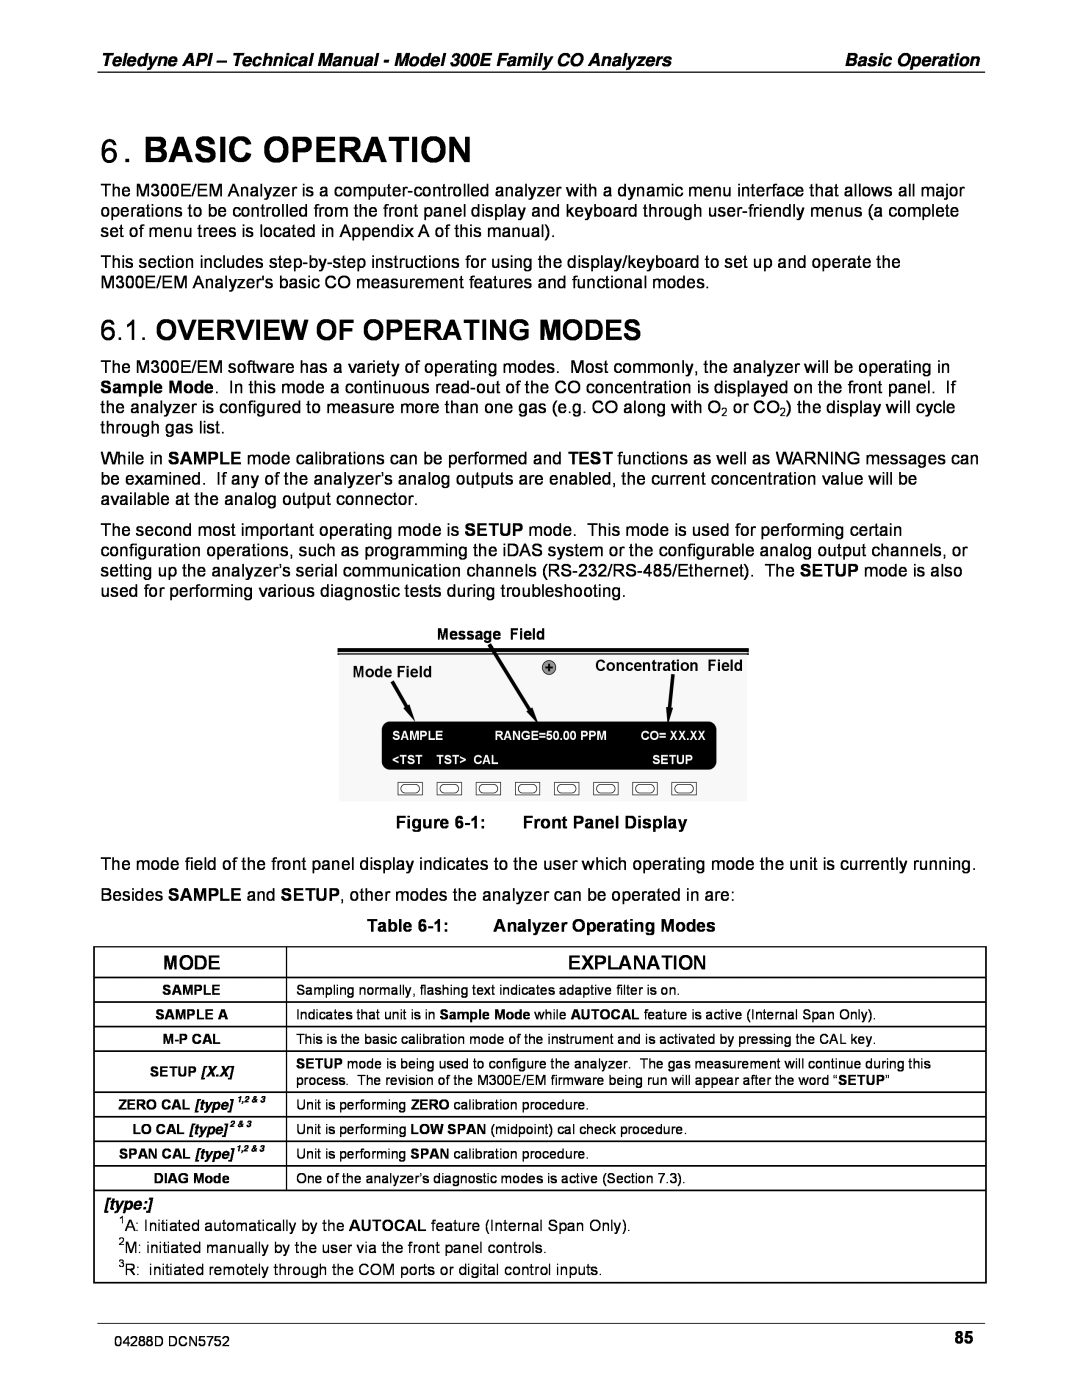 Teledyne M300EM operation manual Basic Operation, Overview Of Operating Modes, Explanation, 1:Front Panel Display 